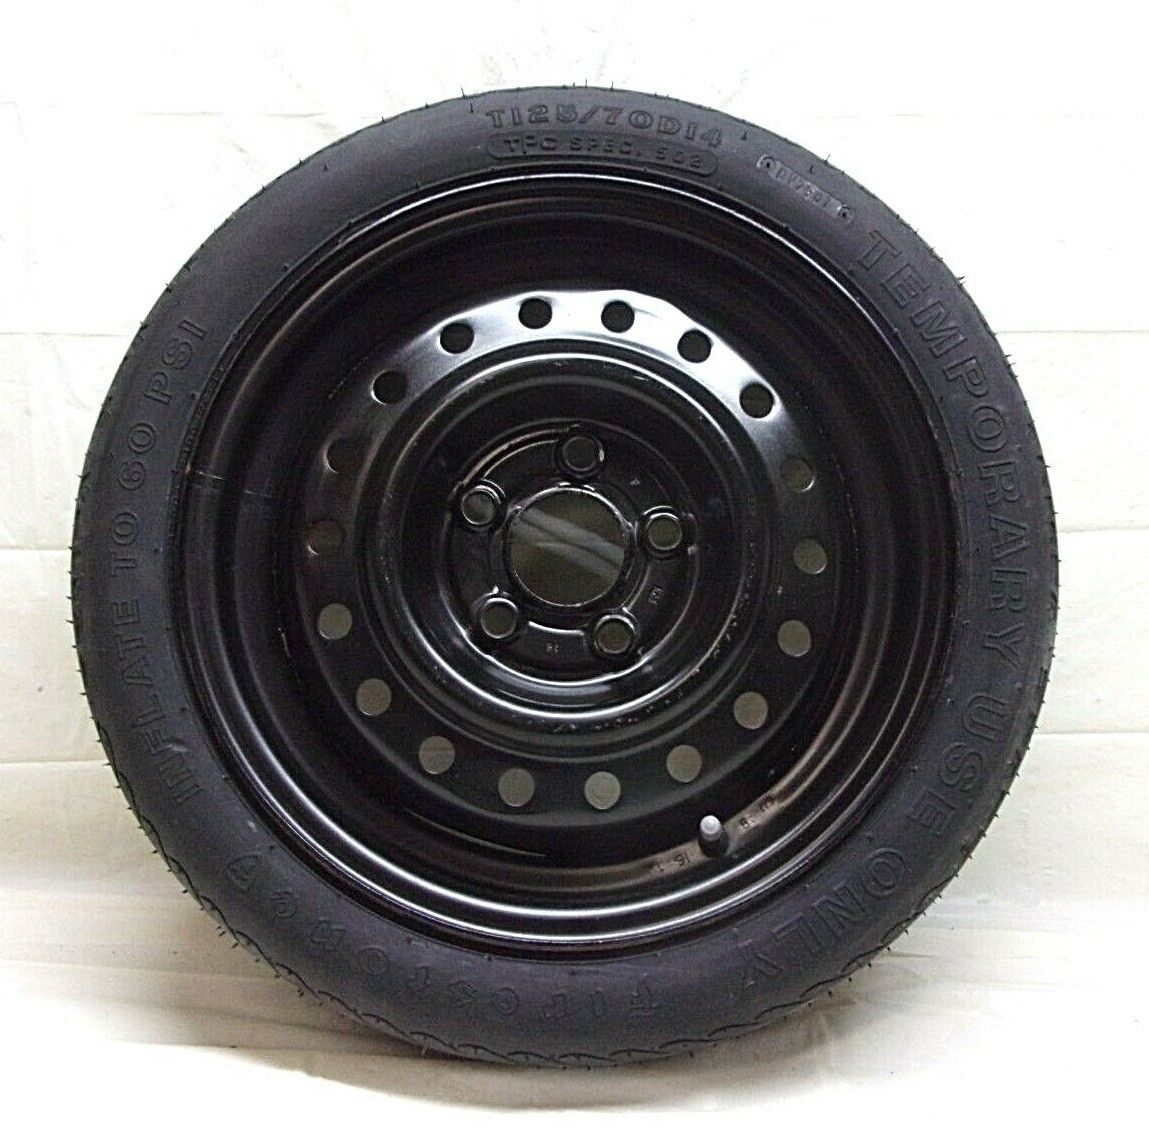 84 BUICK SKYLARK FWD USED T125 70 14 SPACE SAVER EMERGENCY SPARE TIRE